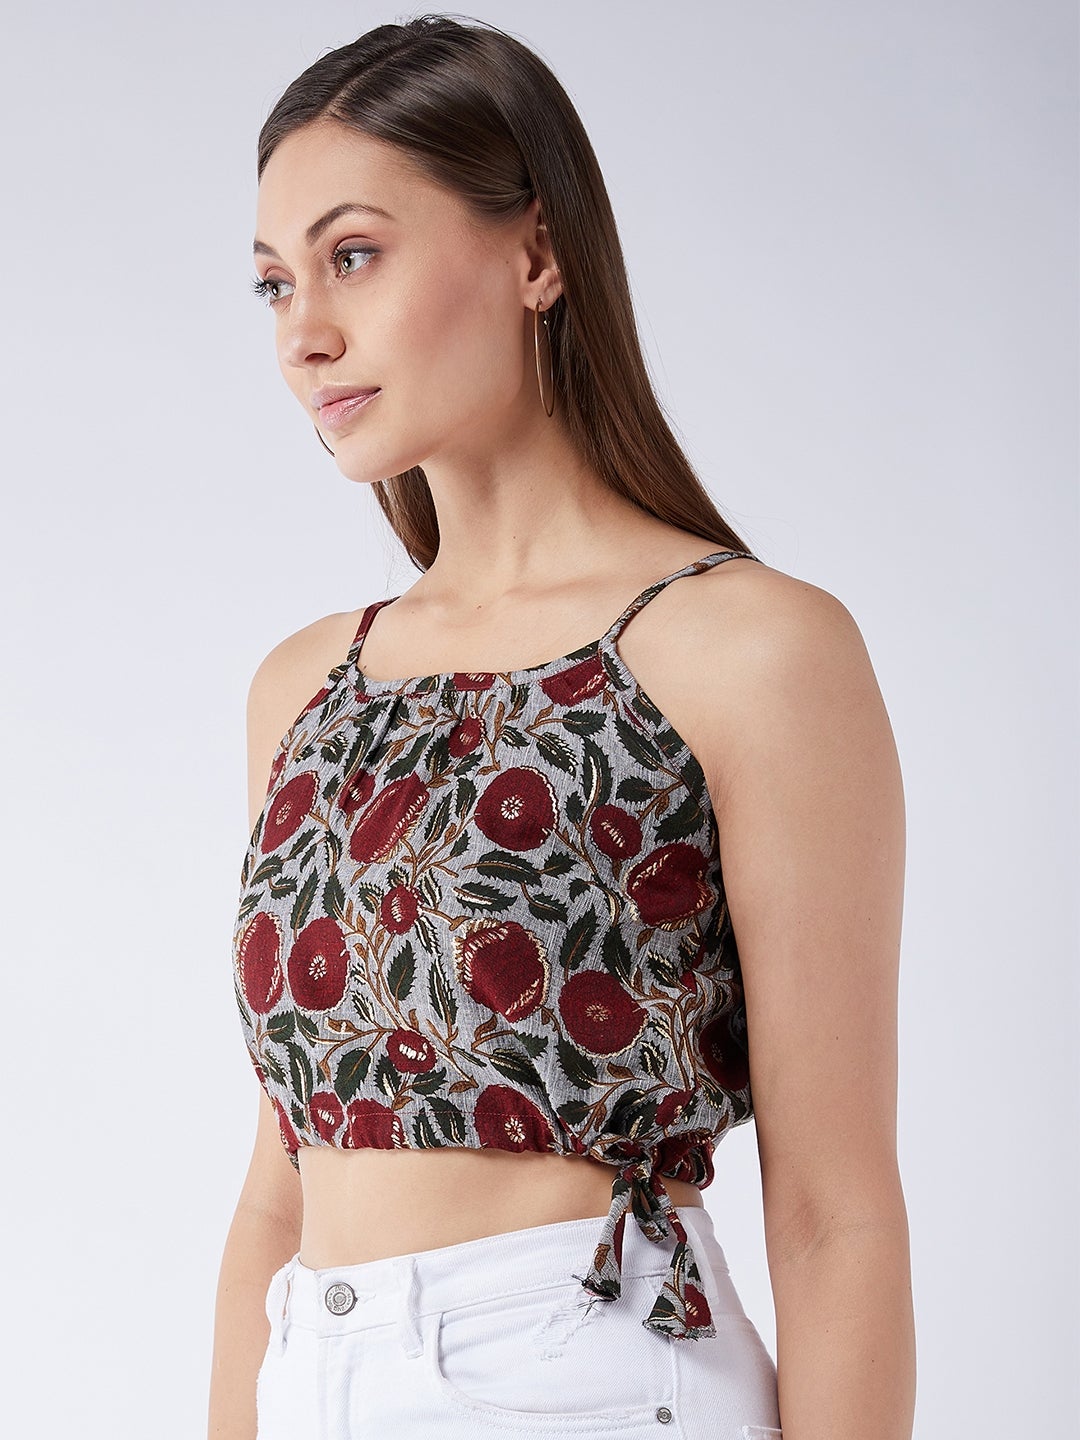 Slate Gray Strappy Crop Top